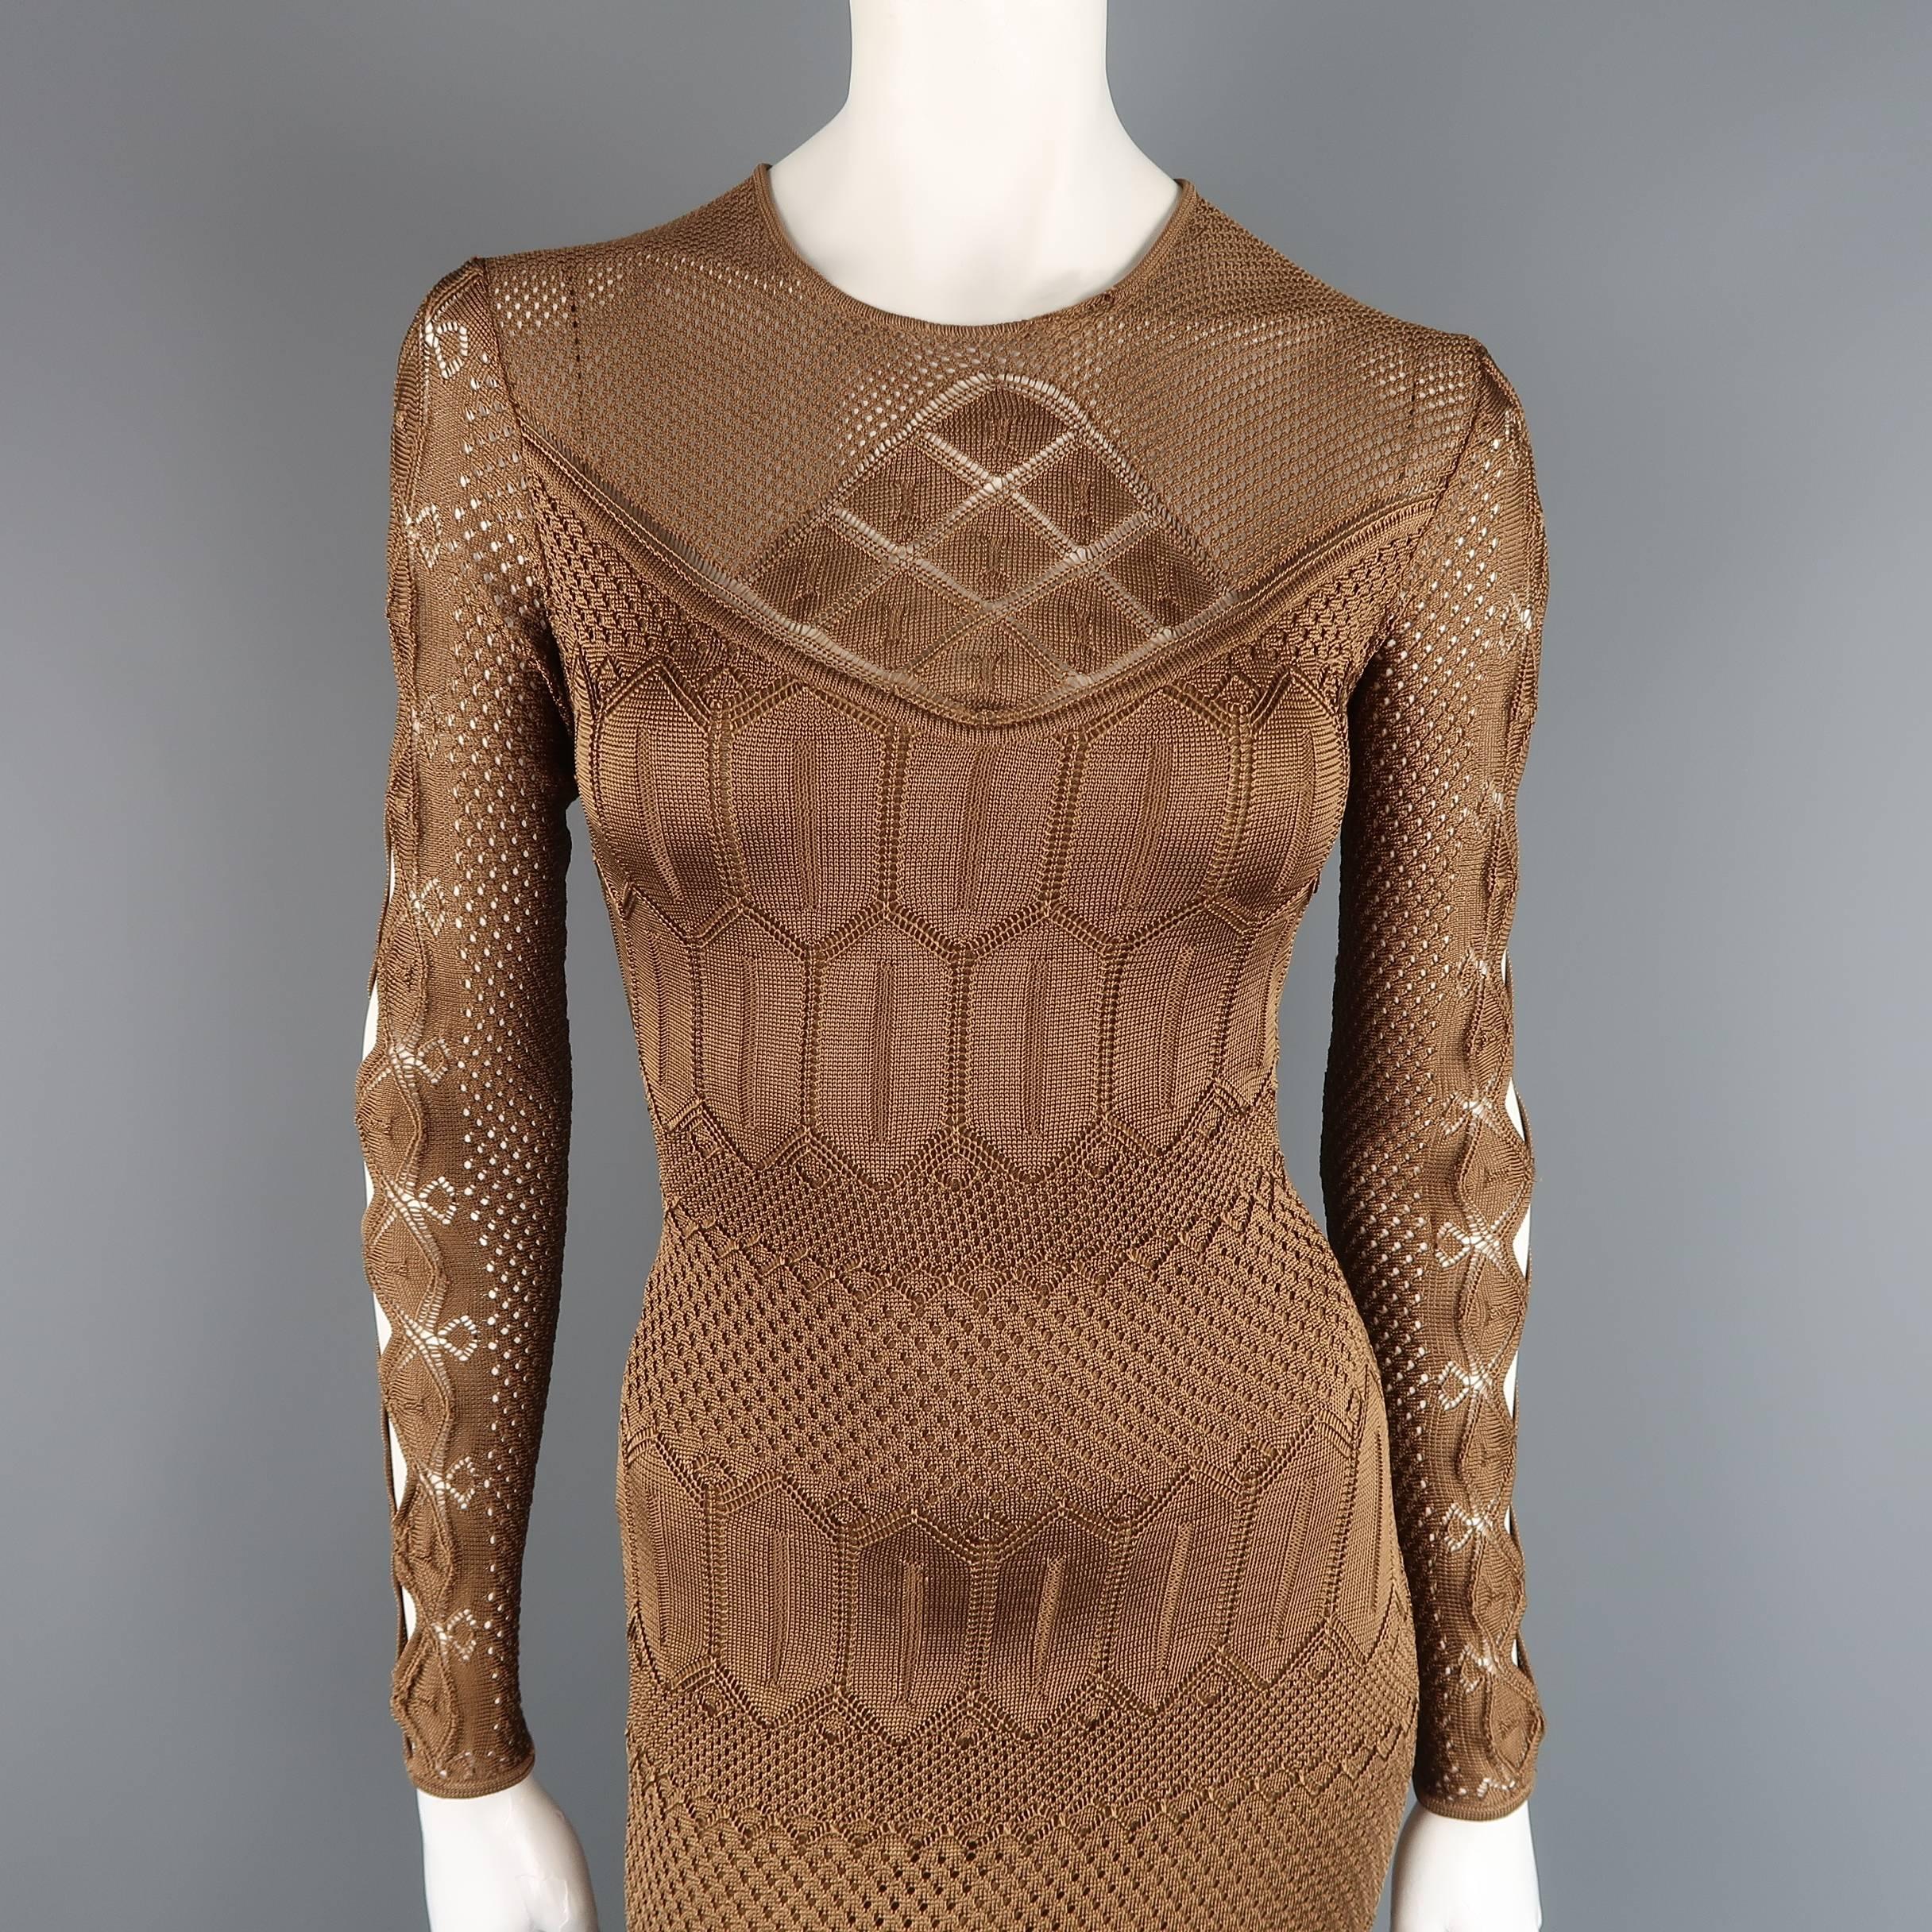 RALPH LAUREN COLLECTION bodycon maxi dress comes in a light copper brown silk knit with a subtle sheen and features intricate pointelle mesh patterns throughout, long sleeves with cutouts, and long pencil skirt with two tiered tassel fringe hem.